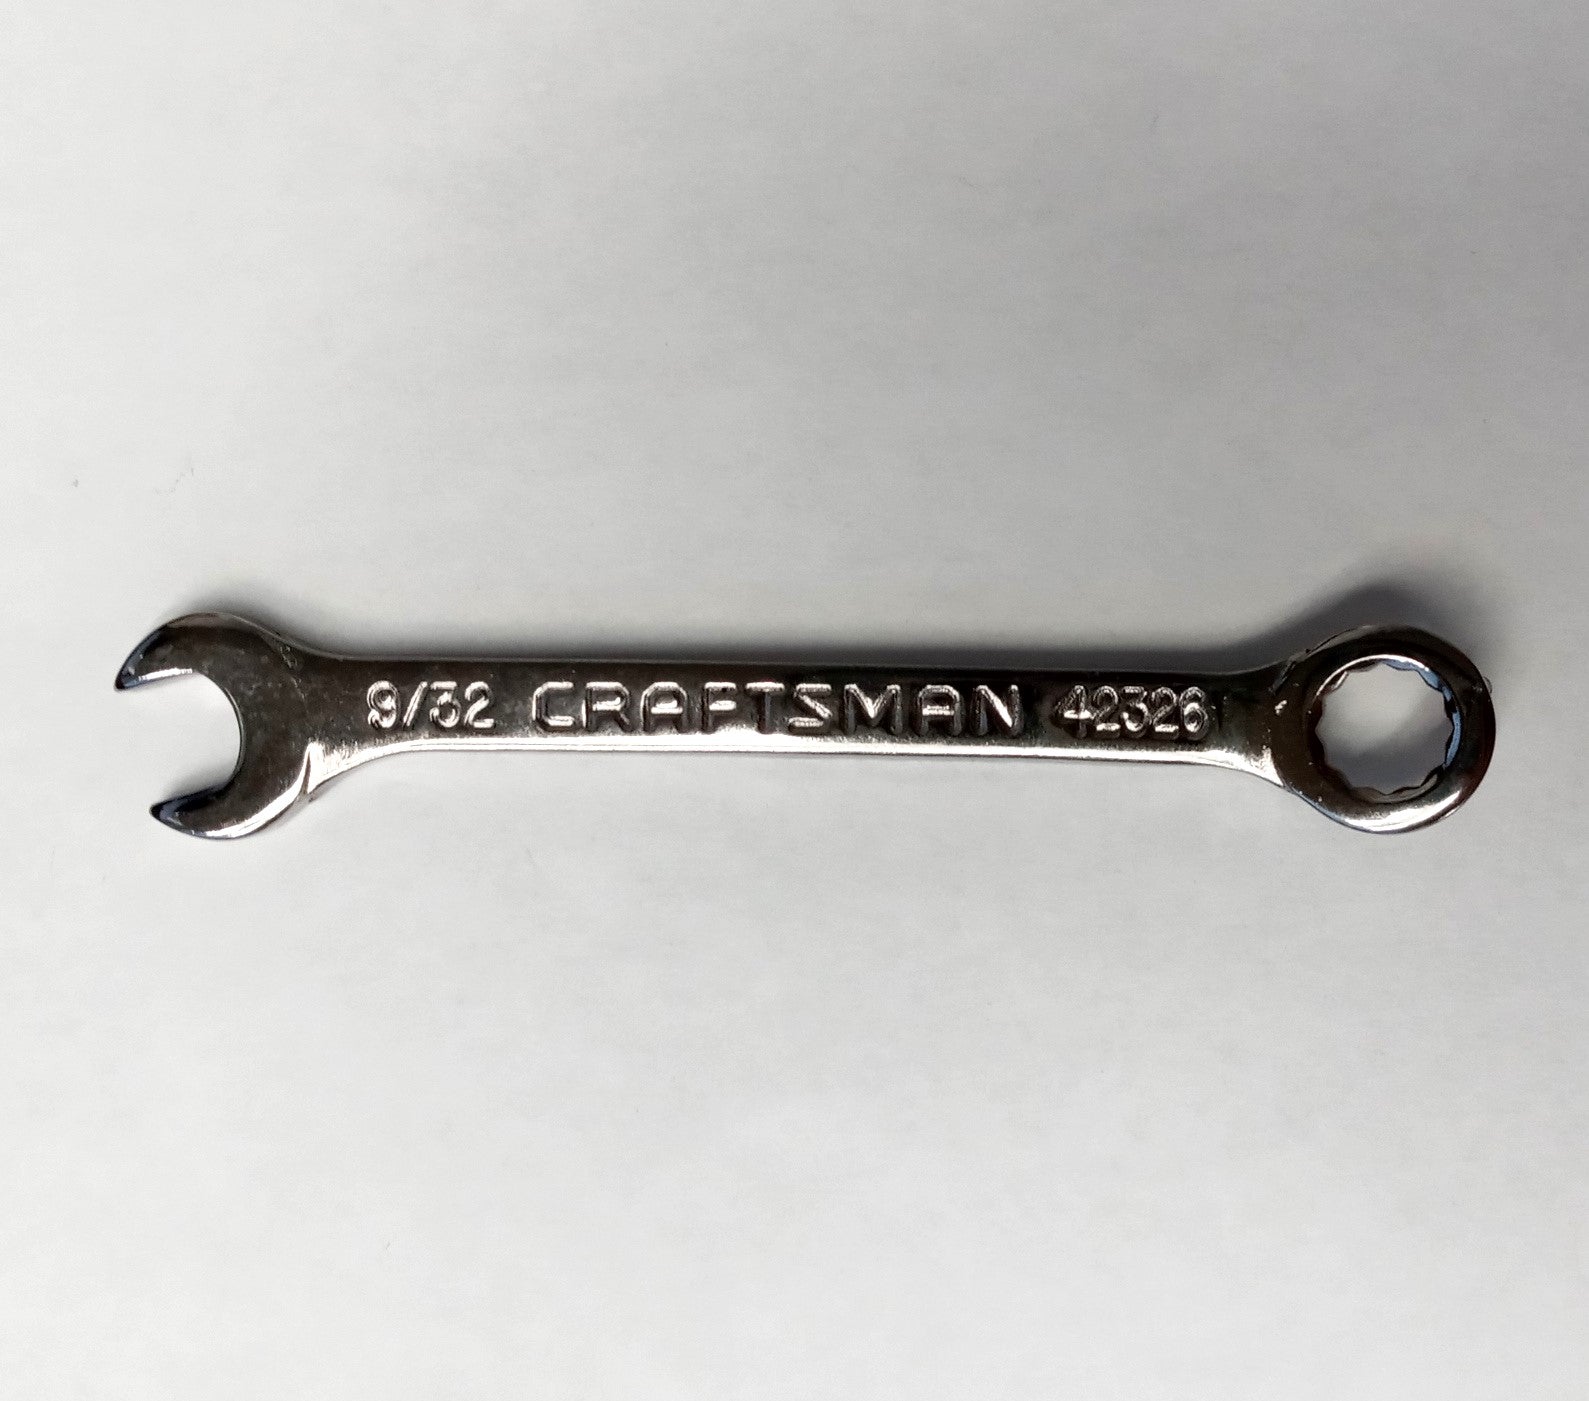 Craftsman 42326 9/32" 12-Point Combination Wrench